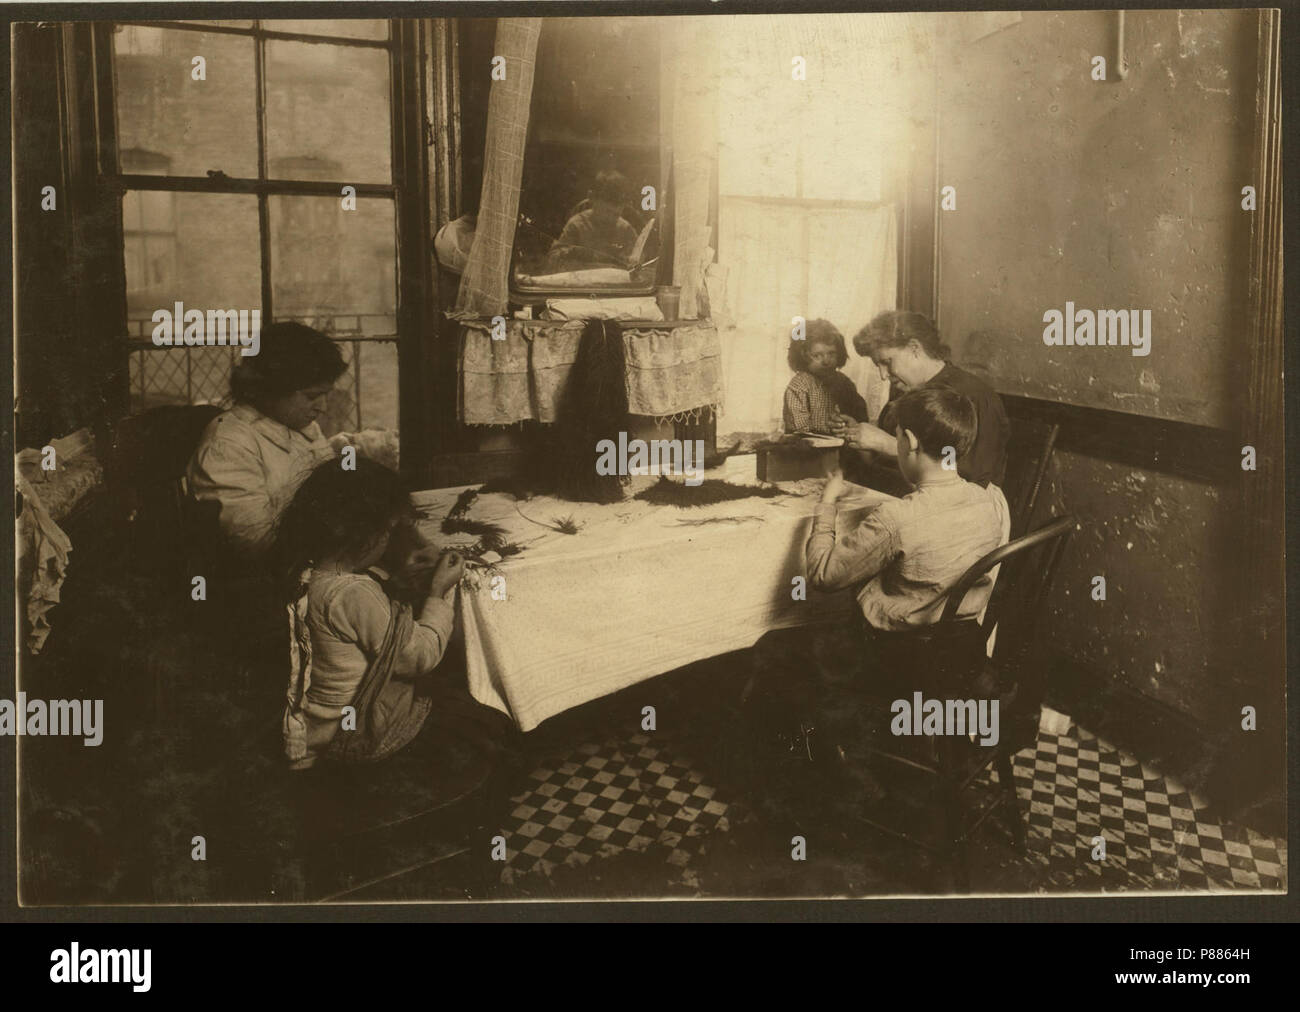 5 P.M. Mrs. Mary Molinari and family, 304 E. 107th St. 'We made feathers some, but not much.' Six-year-old Antoinette ties like an old hand. Dominick, 9 years old, works some. Annie 9, the Stock Photo